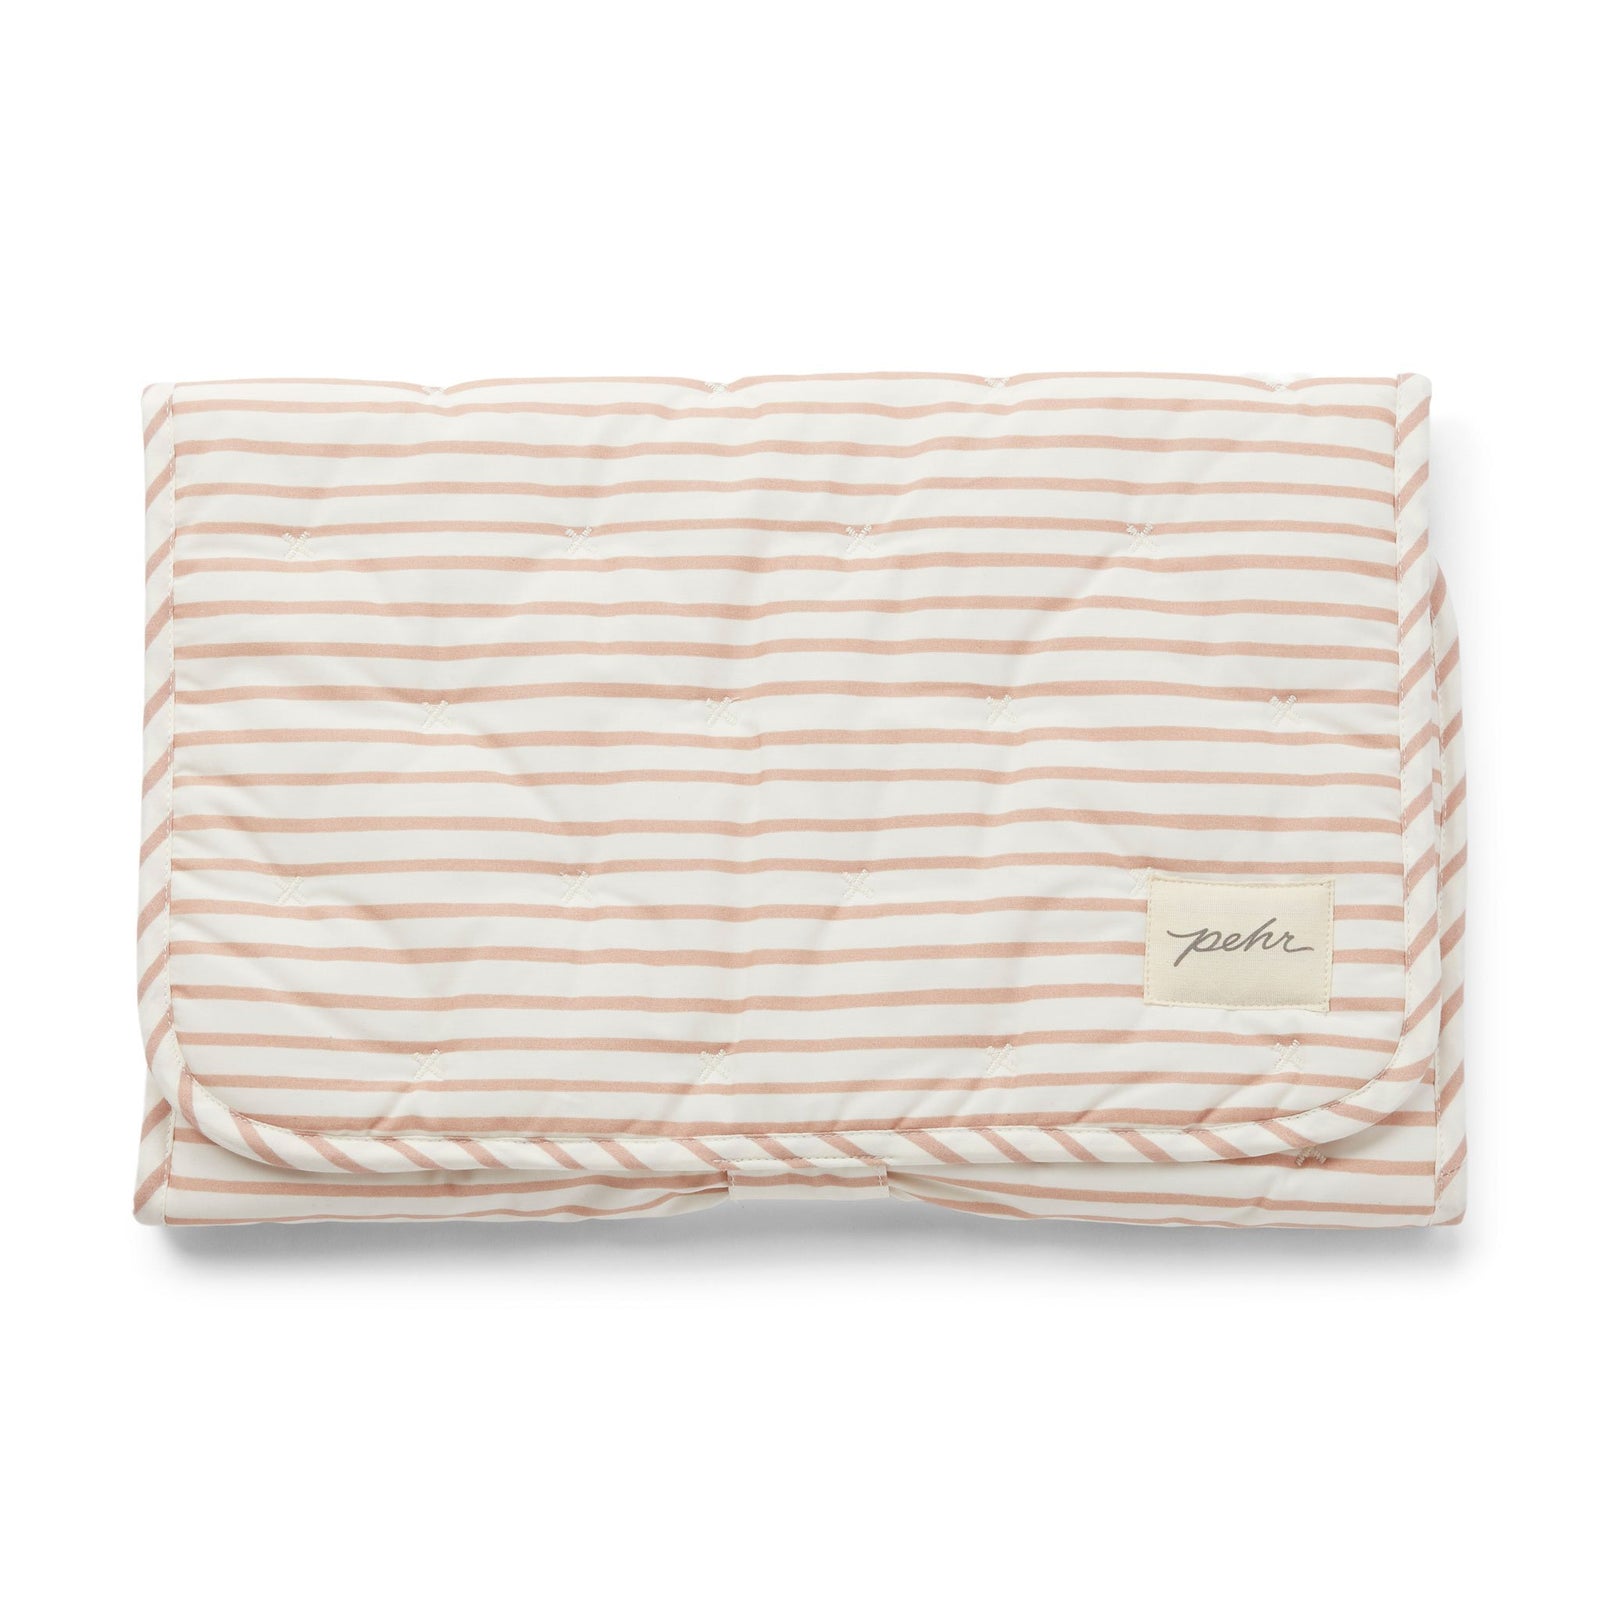 Pehr Rose Pink Organic On The Go Travel Change Pad folded. GOTS Certified Organic Cotton & Dyes. White with pink stripes.